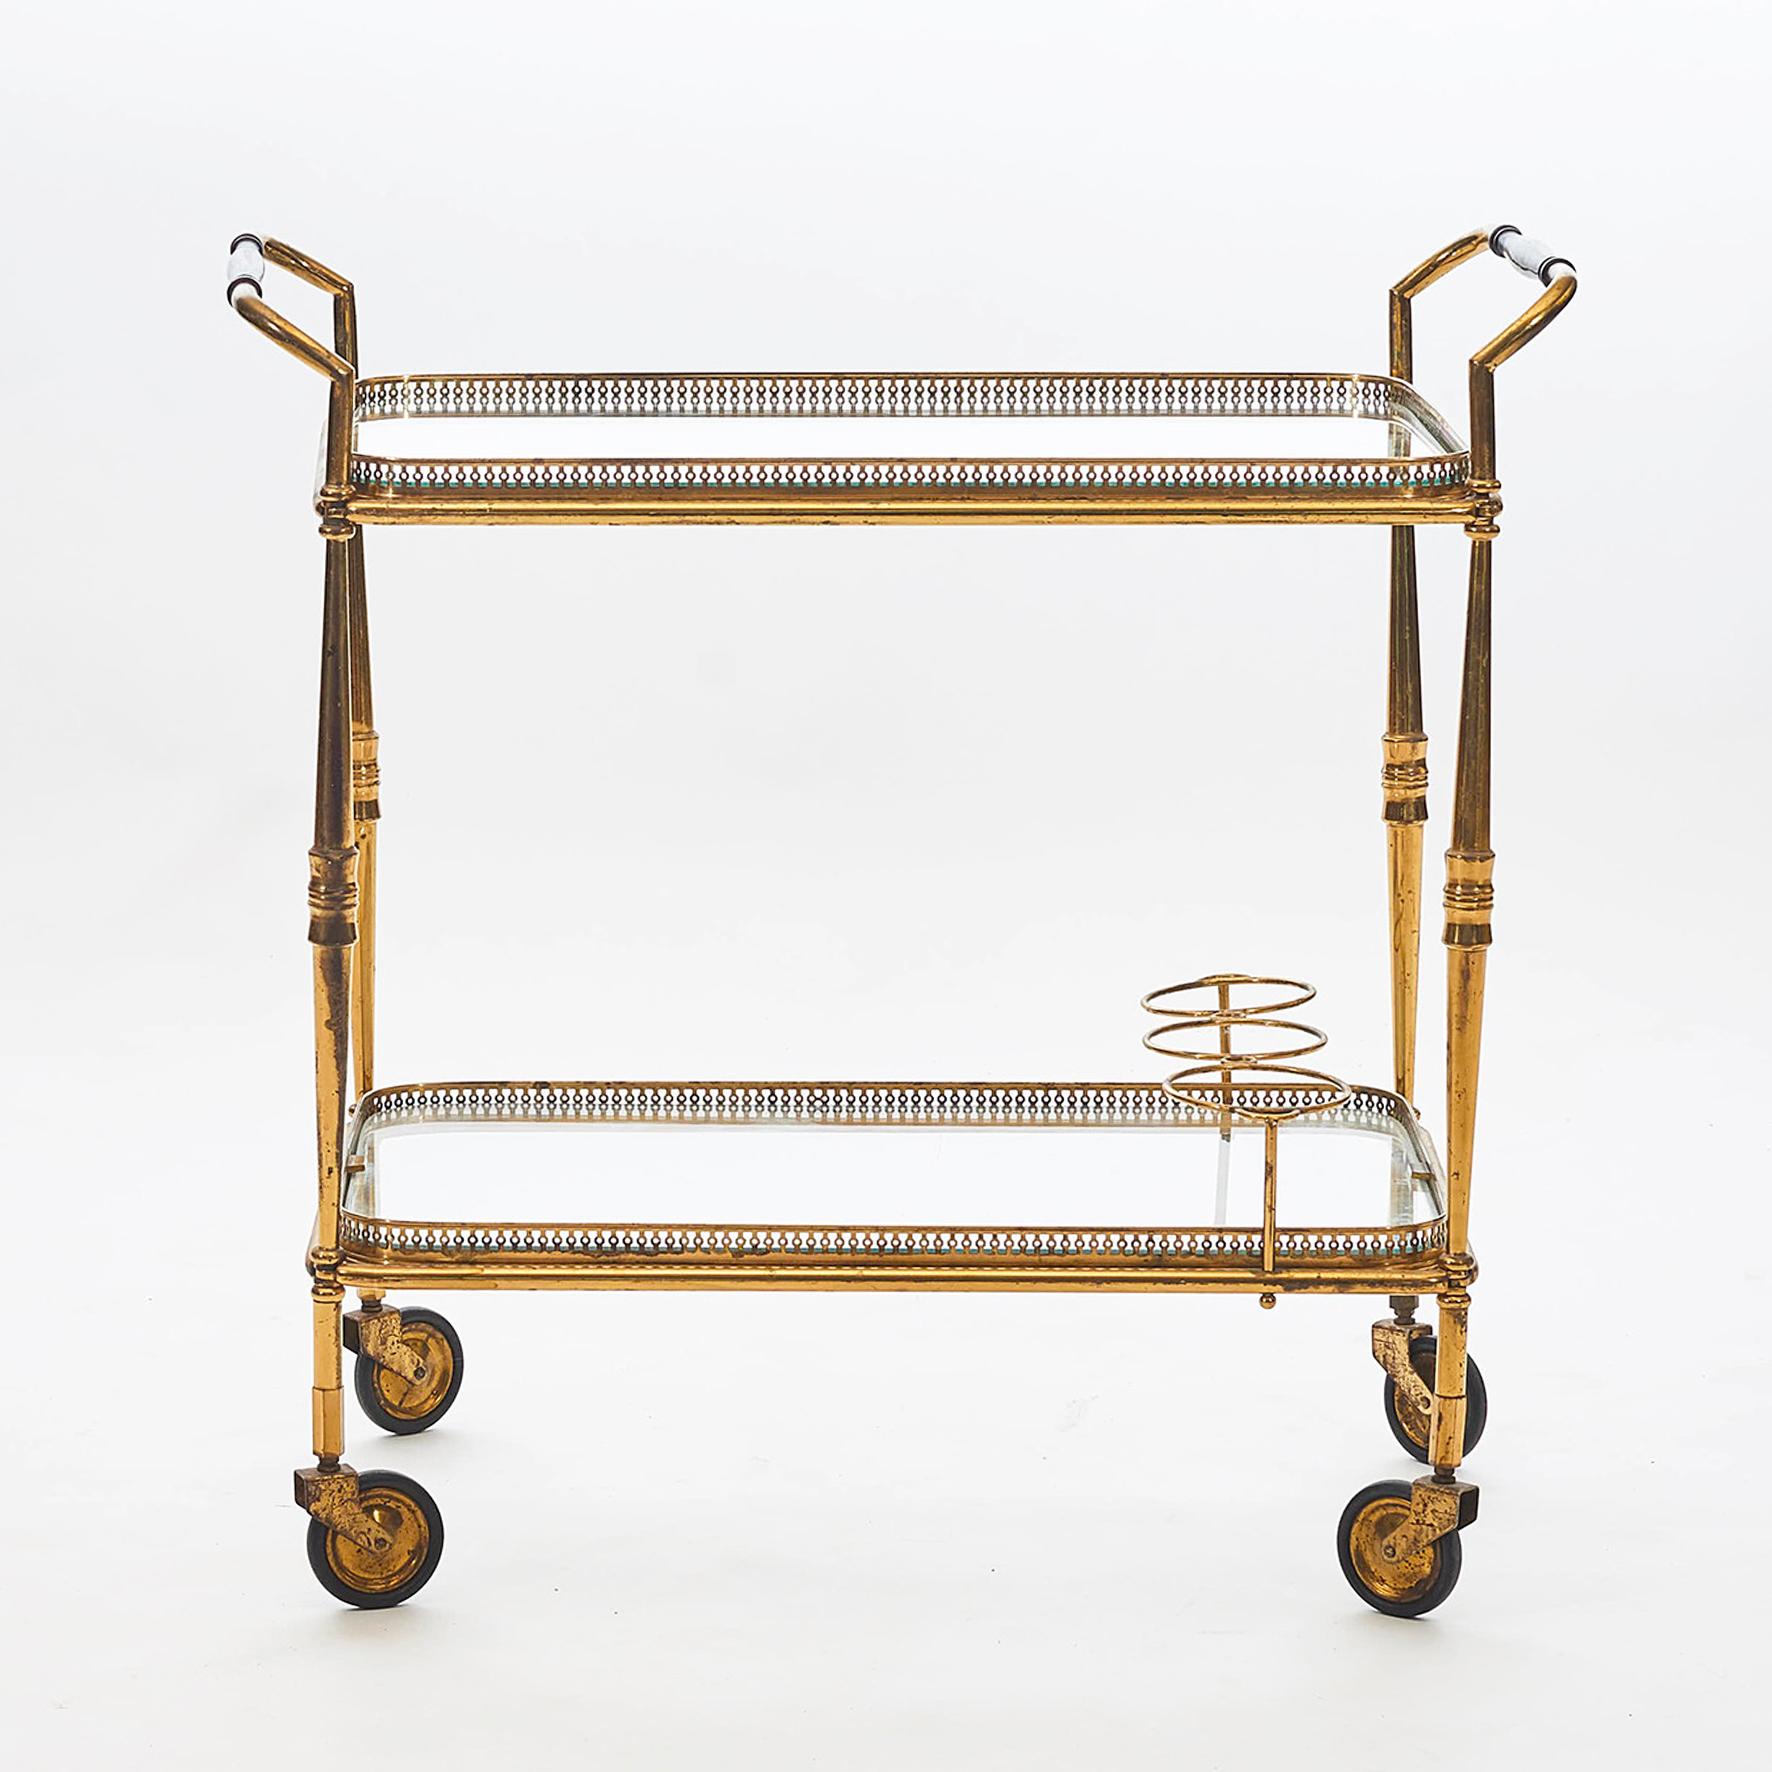 French Art Deco bar or tea trolley in brass. Loose trays with high edge and glass base, handle in mahogany. Collapsible frame. France, approximate 1920-1930. Original condition with natural patina.